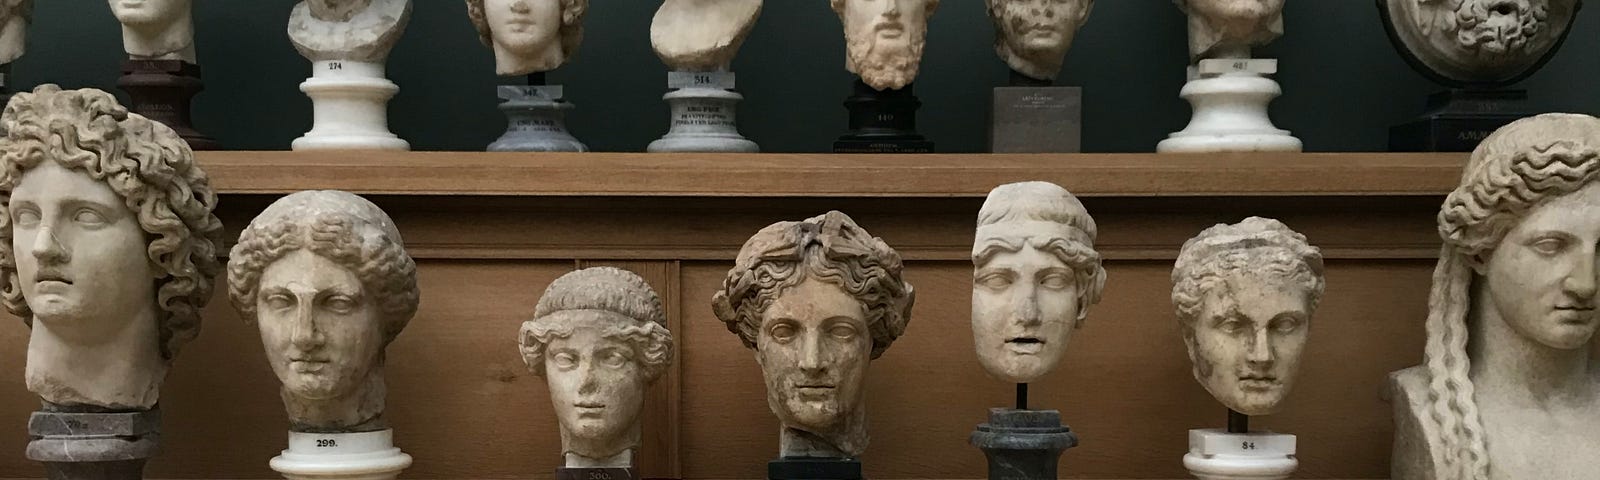 A room of busts representing the gods of Christianity.